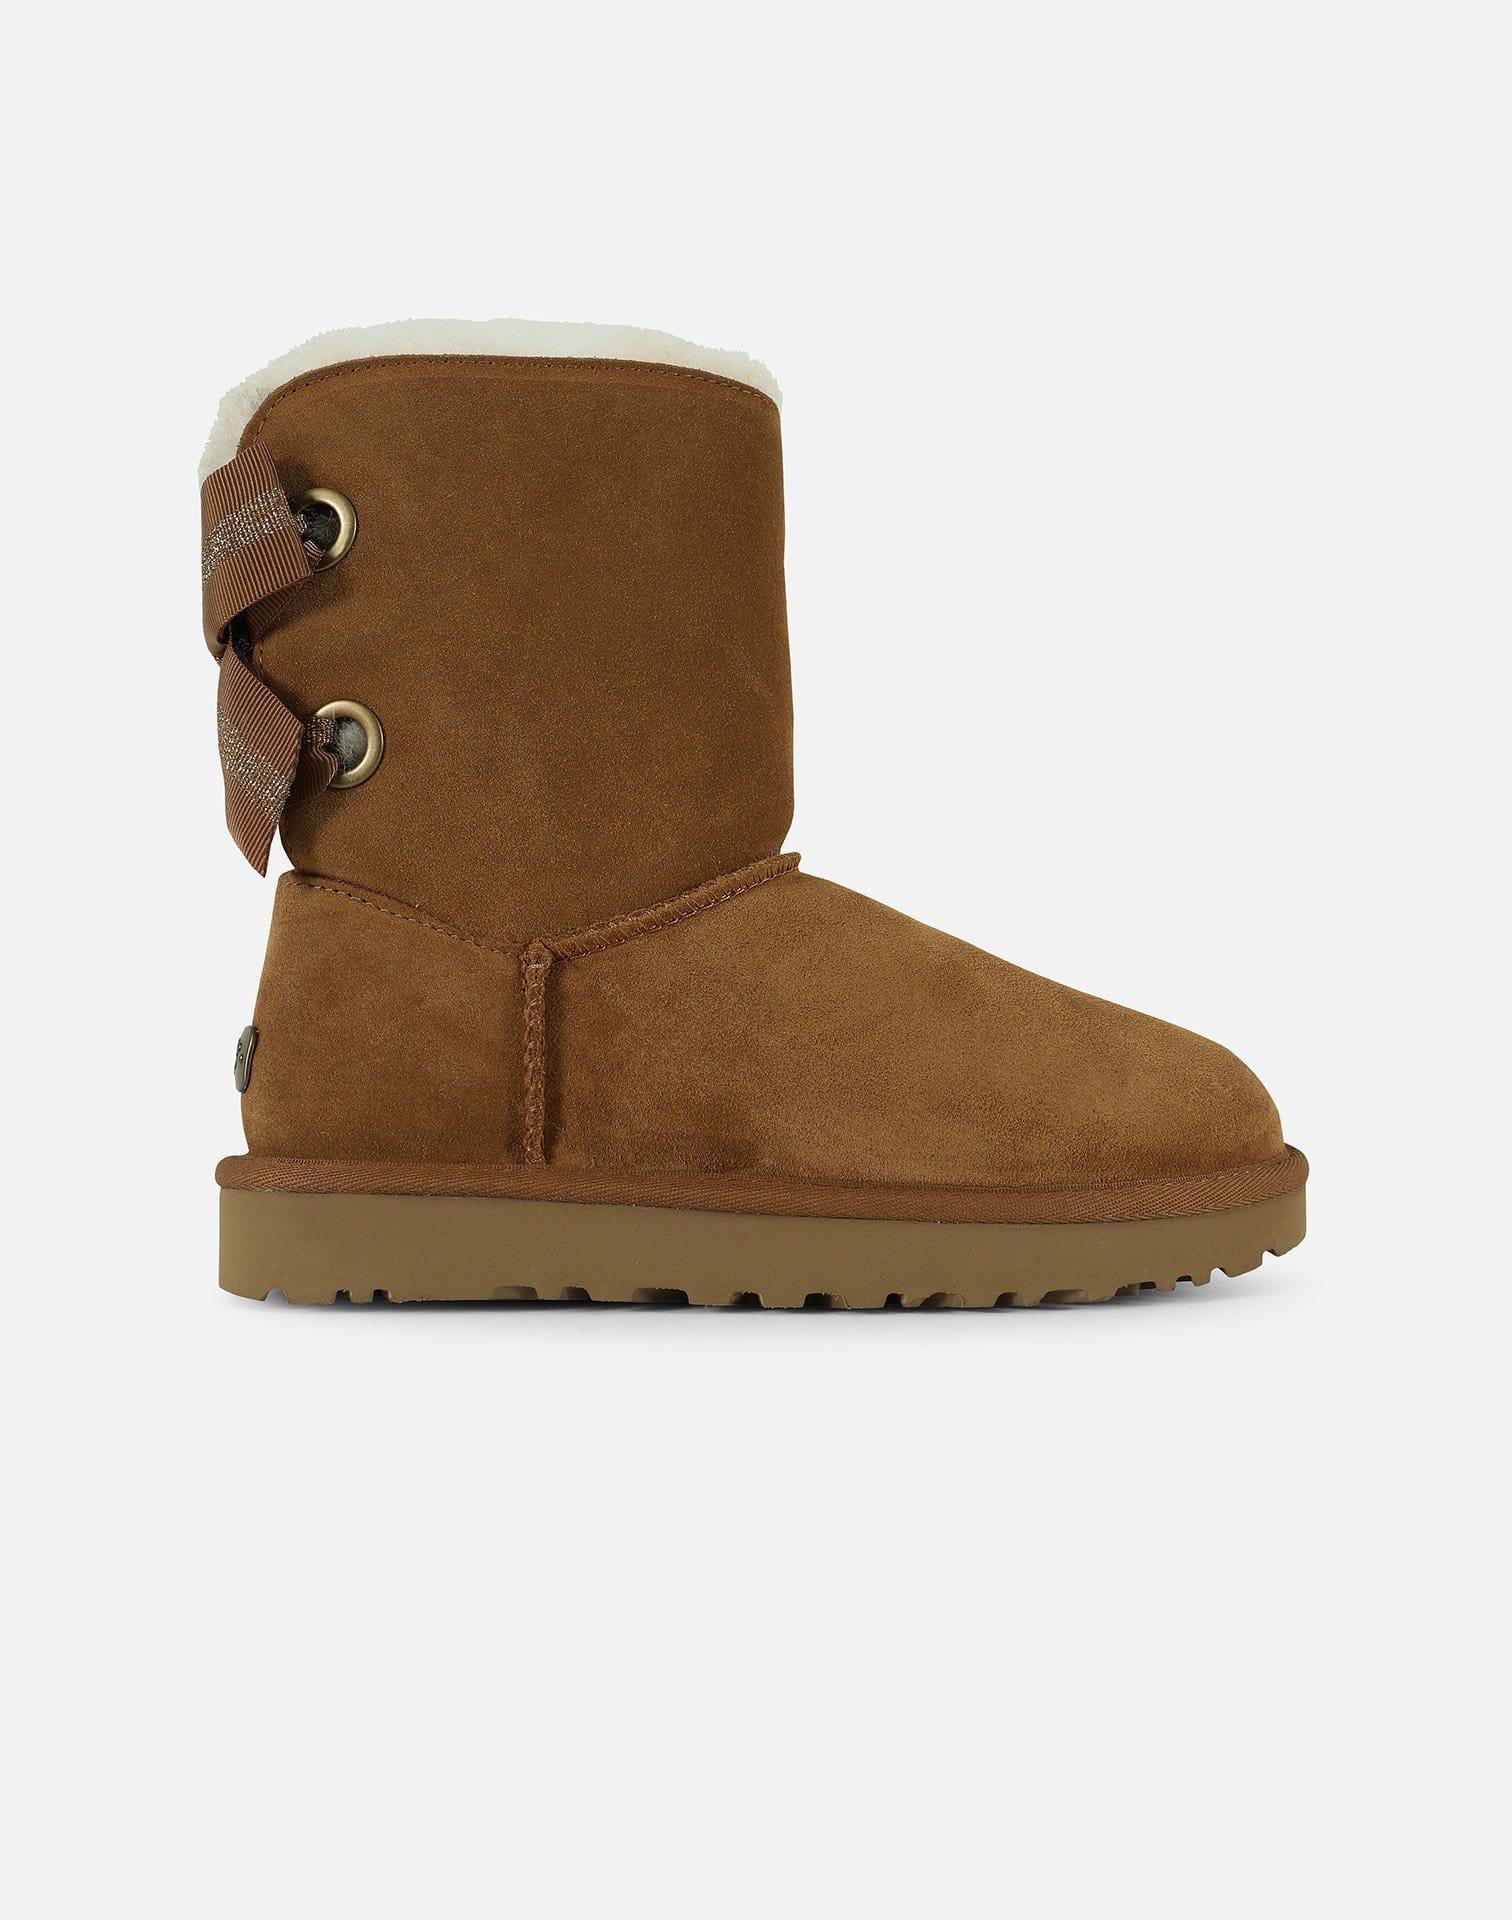 UGG CUSTOMIZABLE BAILEY BOW SHORT BOOTS Product Image